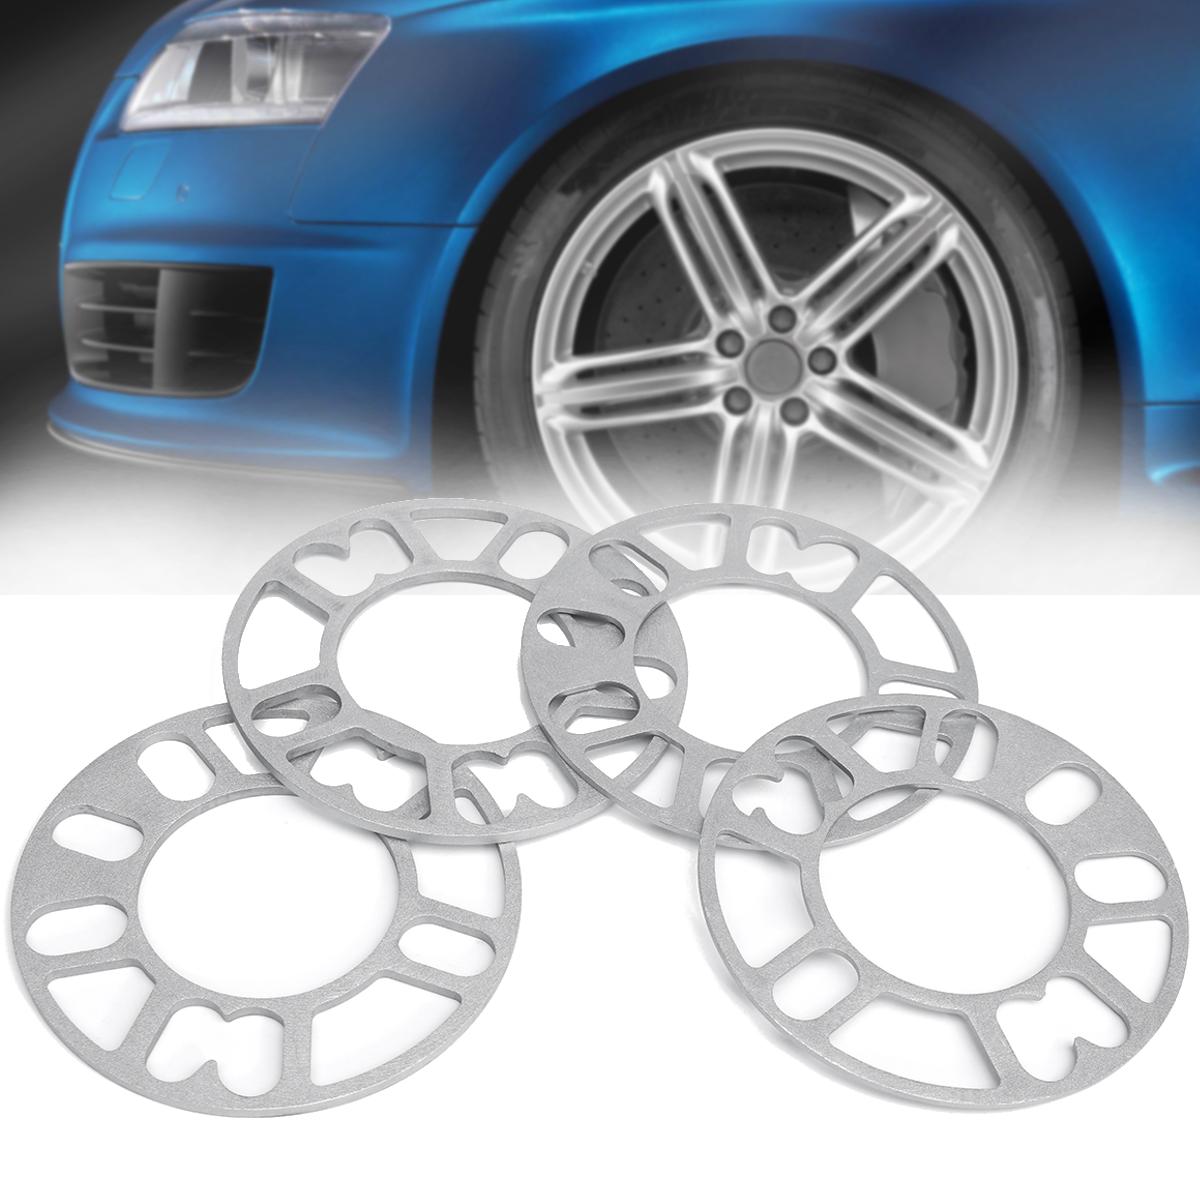 4pcs-3mm-5mm-Universal-Alloy-Wheel-Spacers-Shims-Set-Kit-For-4-and-5-Stud-1217186